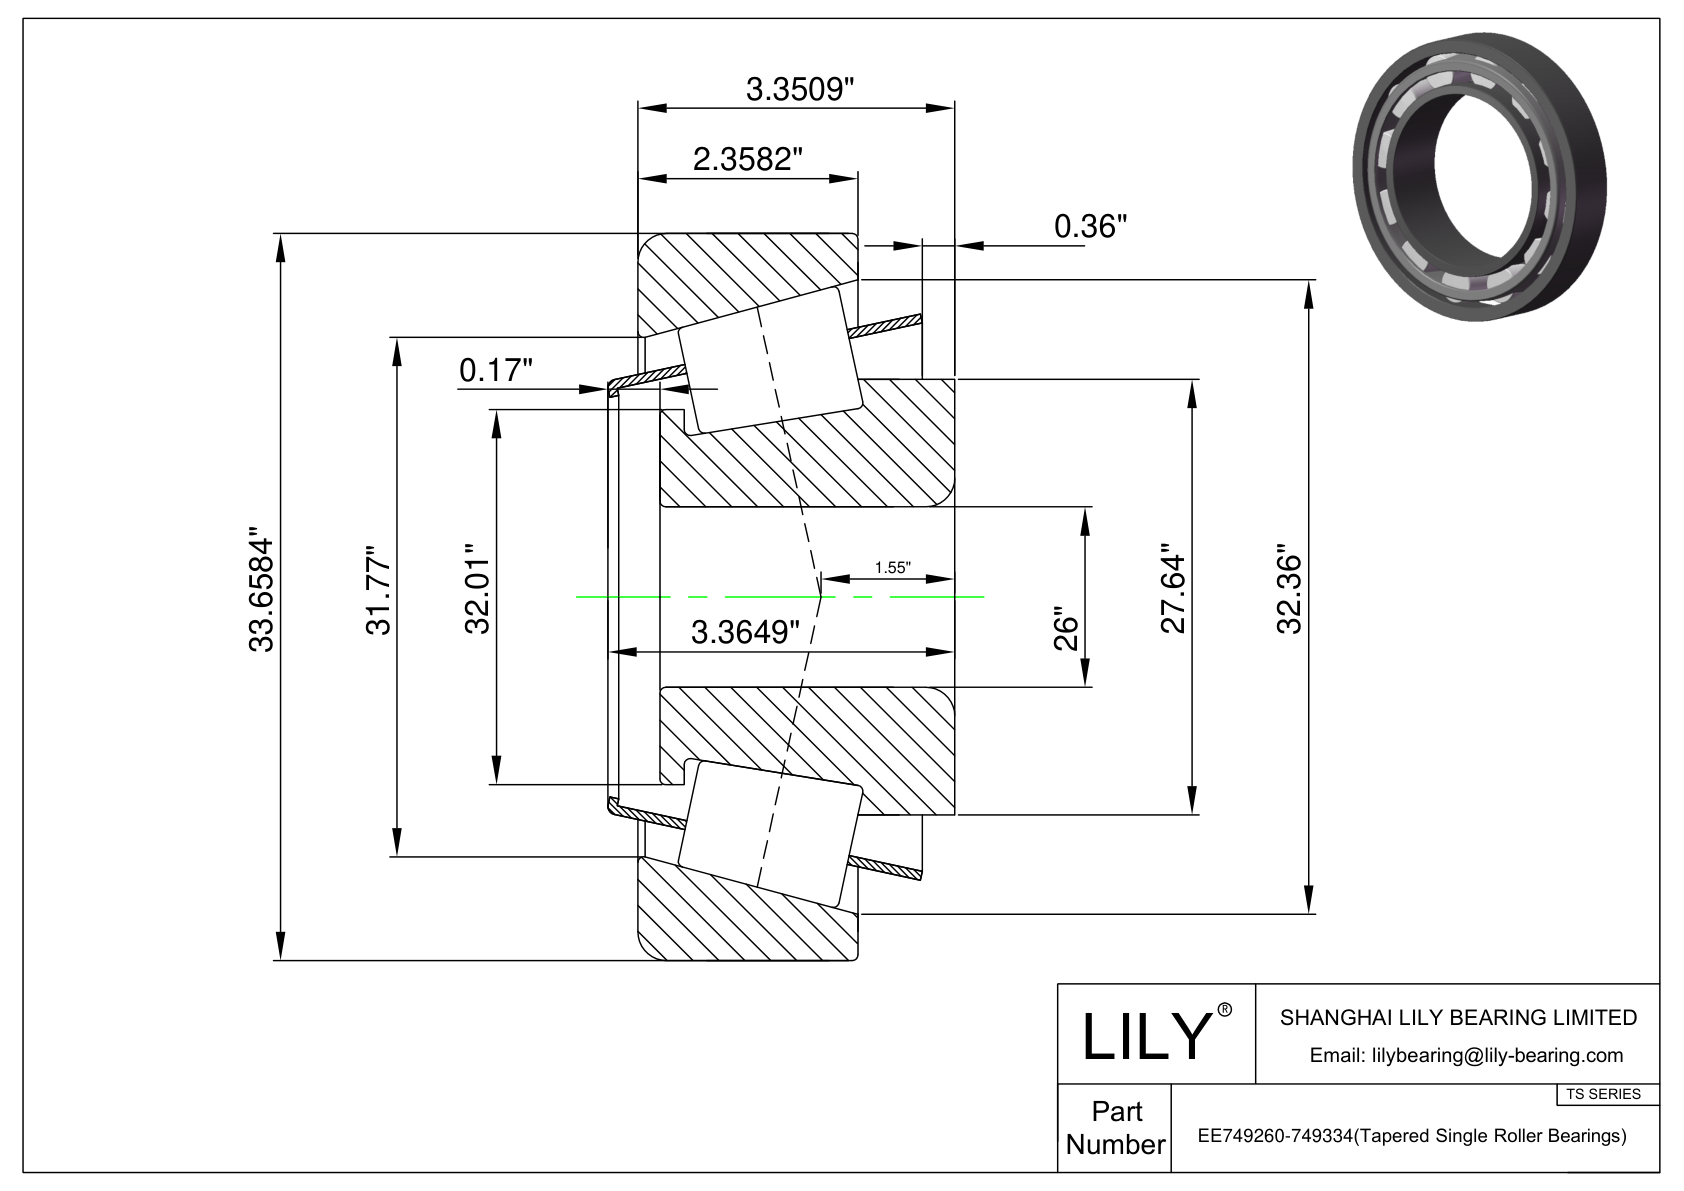 EE749260-749334 TS (Tapered Single Roller Bearings) (Imperial) cad drawing